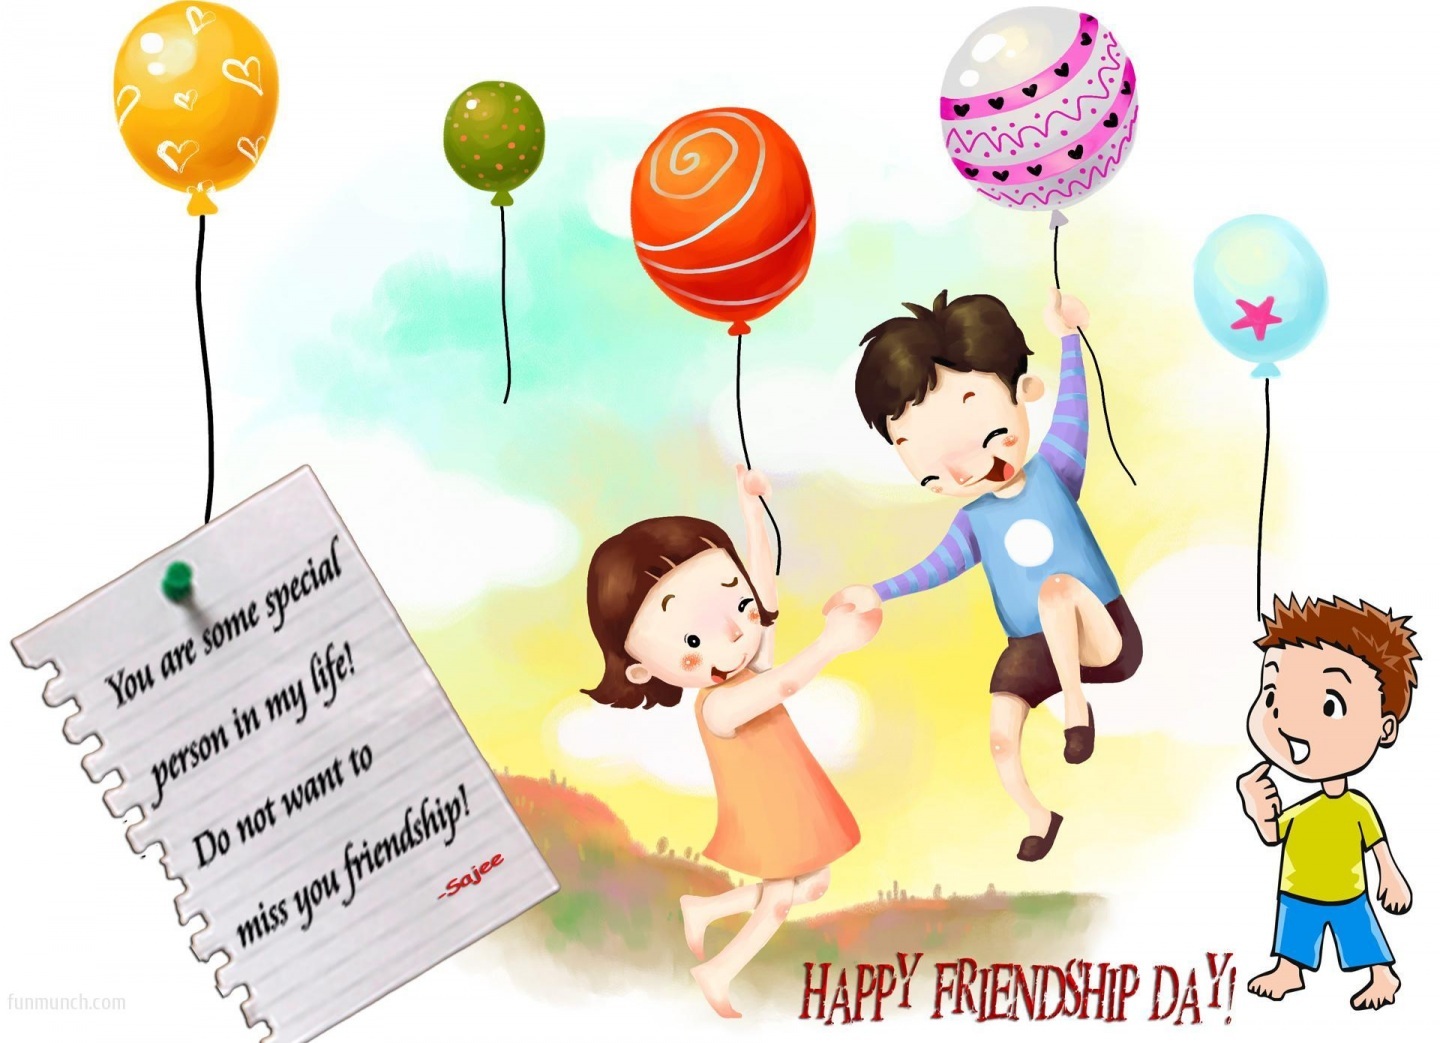 Happy Friendship Day Cartoon Wallpaper - Friendship Day Quotes Anime , HD Wallpaper & Backgrounds